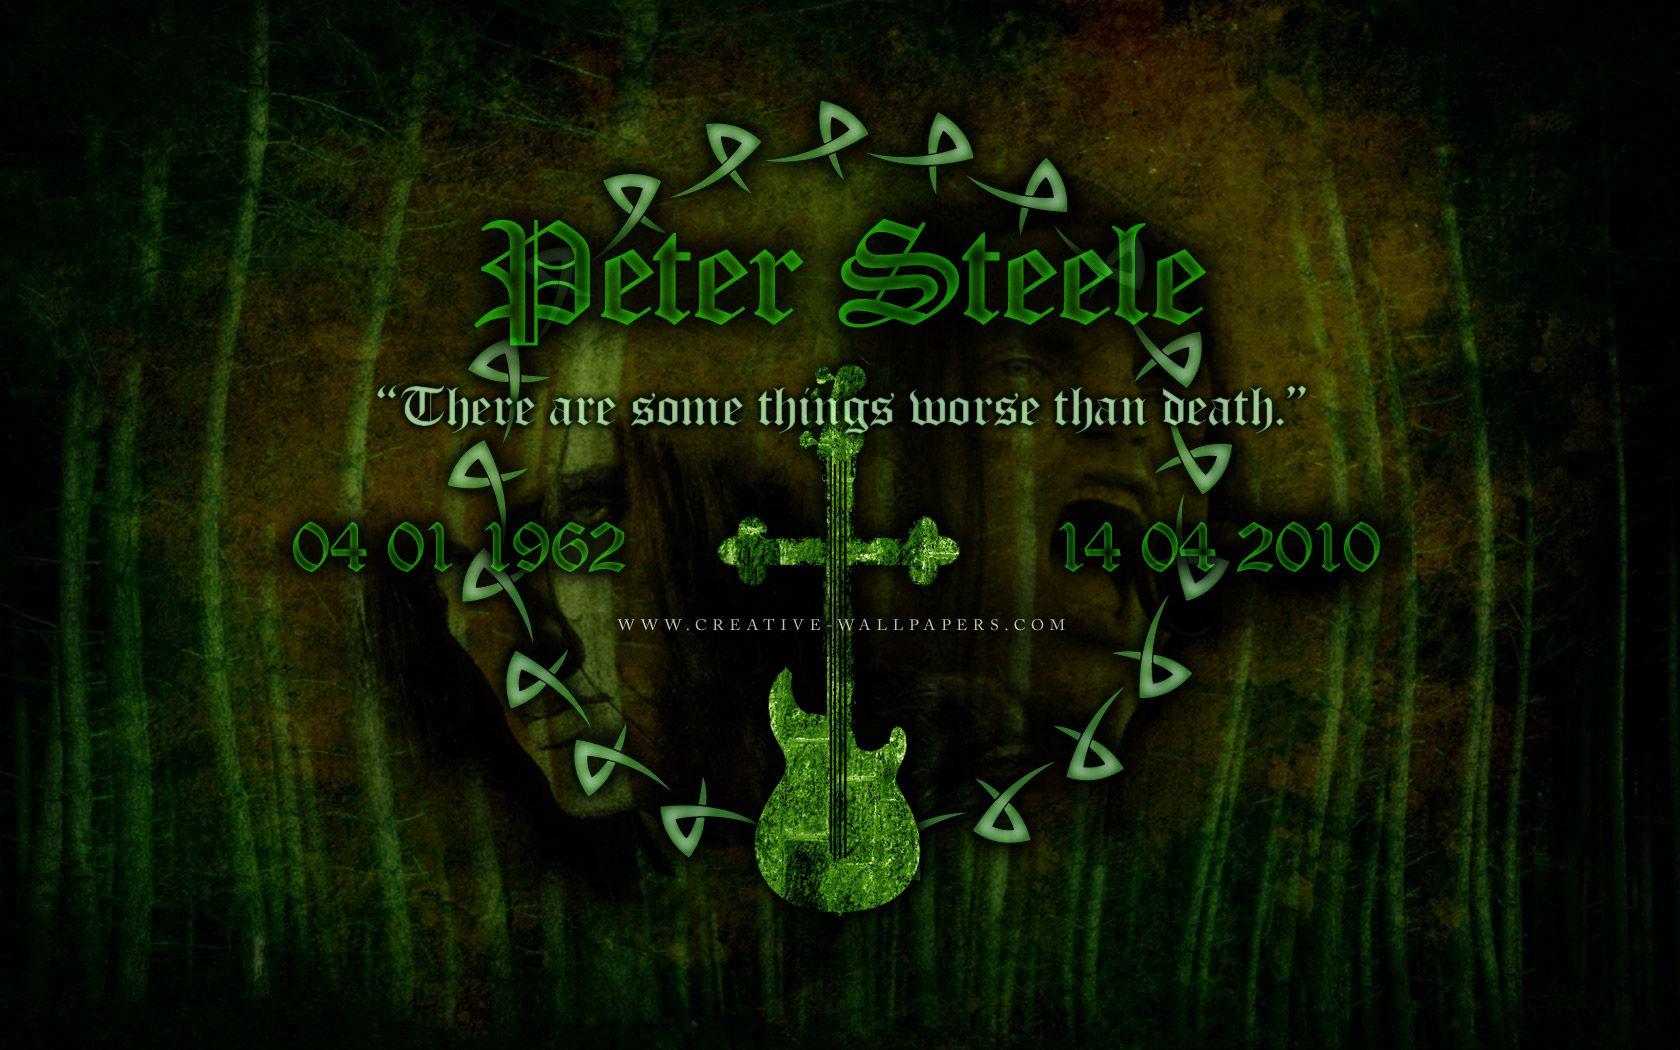 Peter Steele Desktop Background from us at Creative Wallpaper!